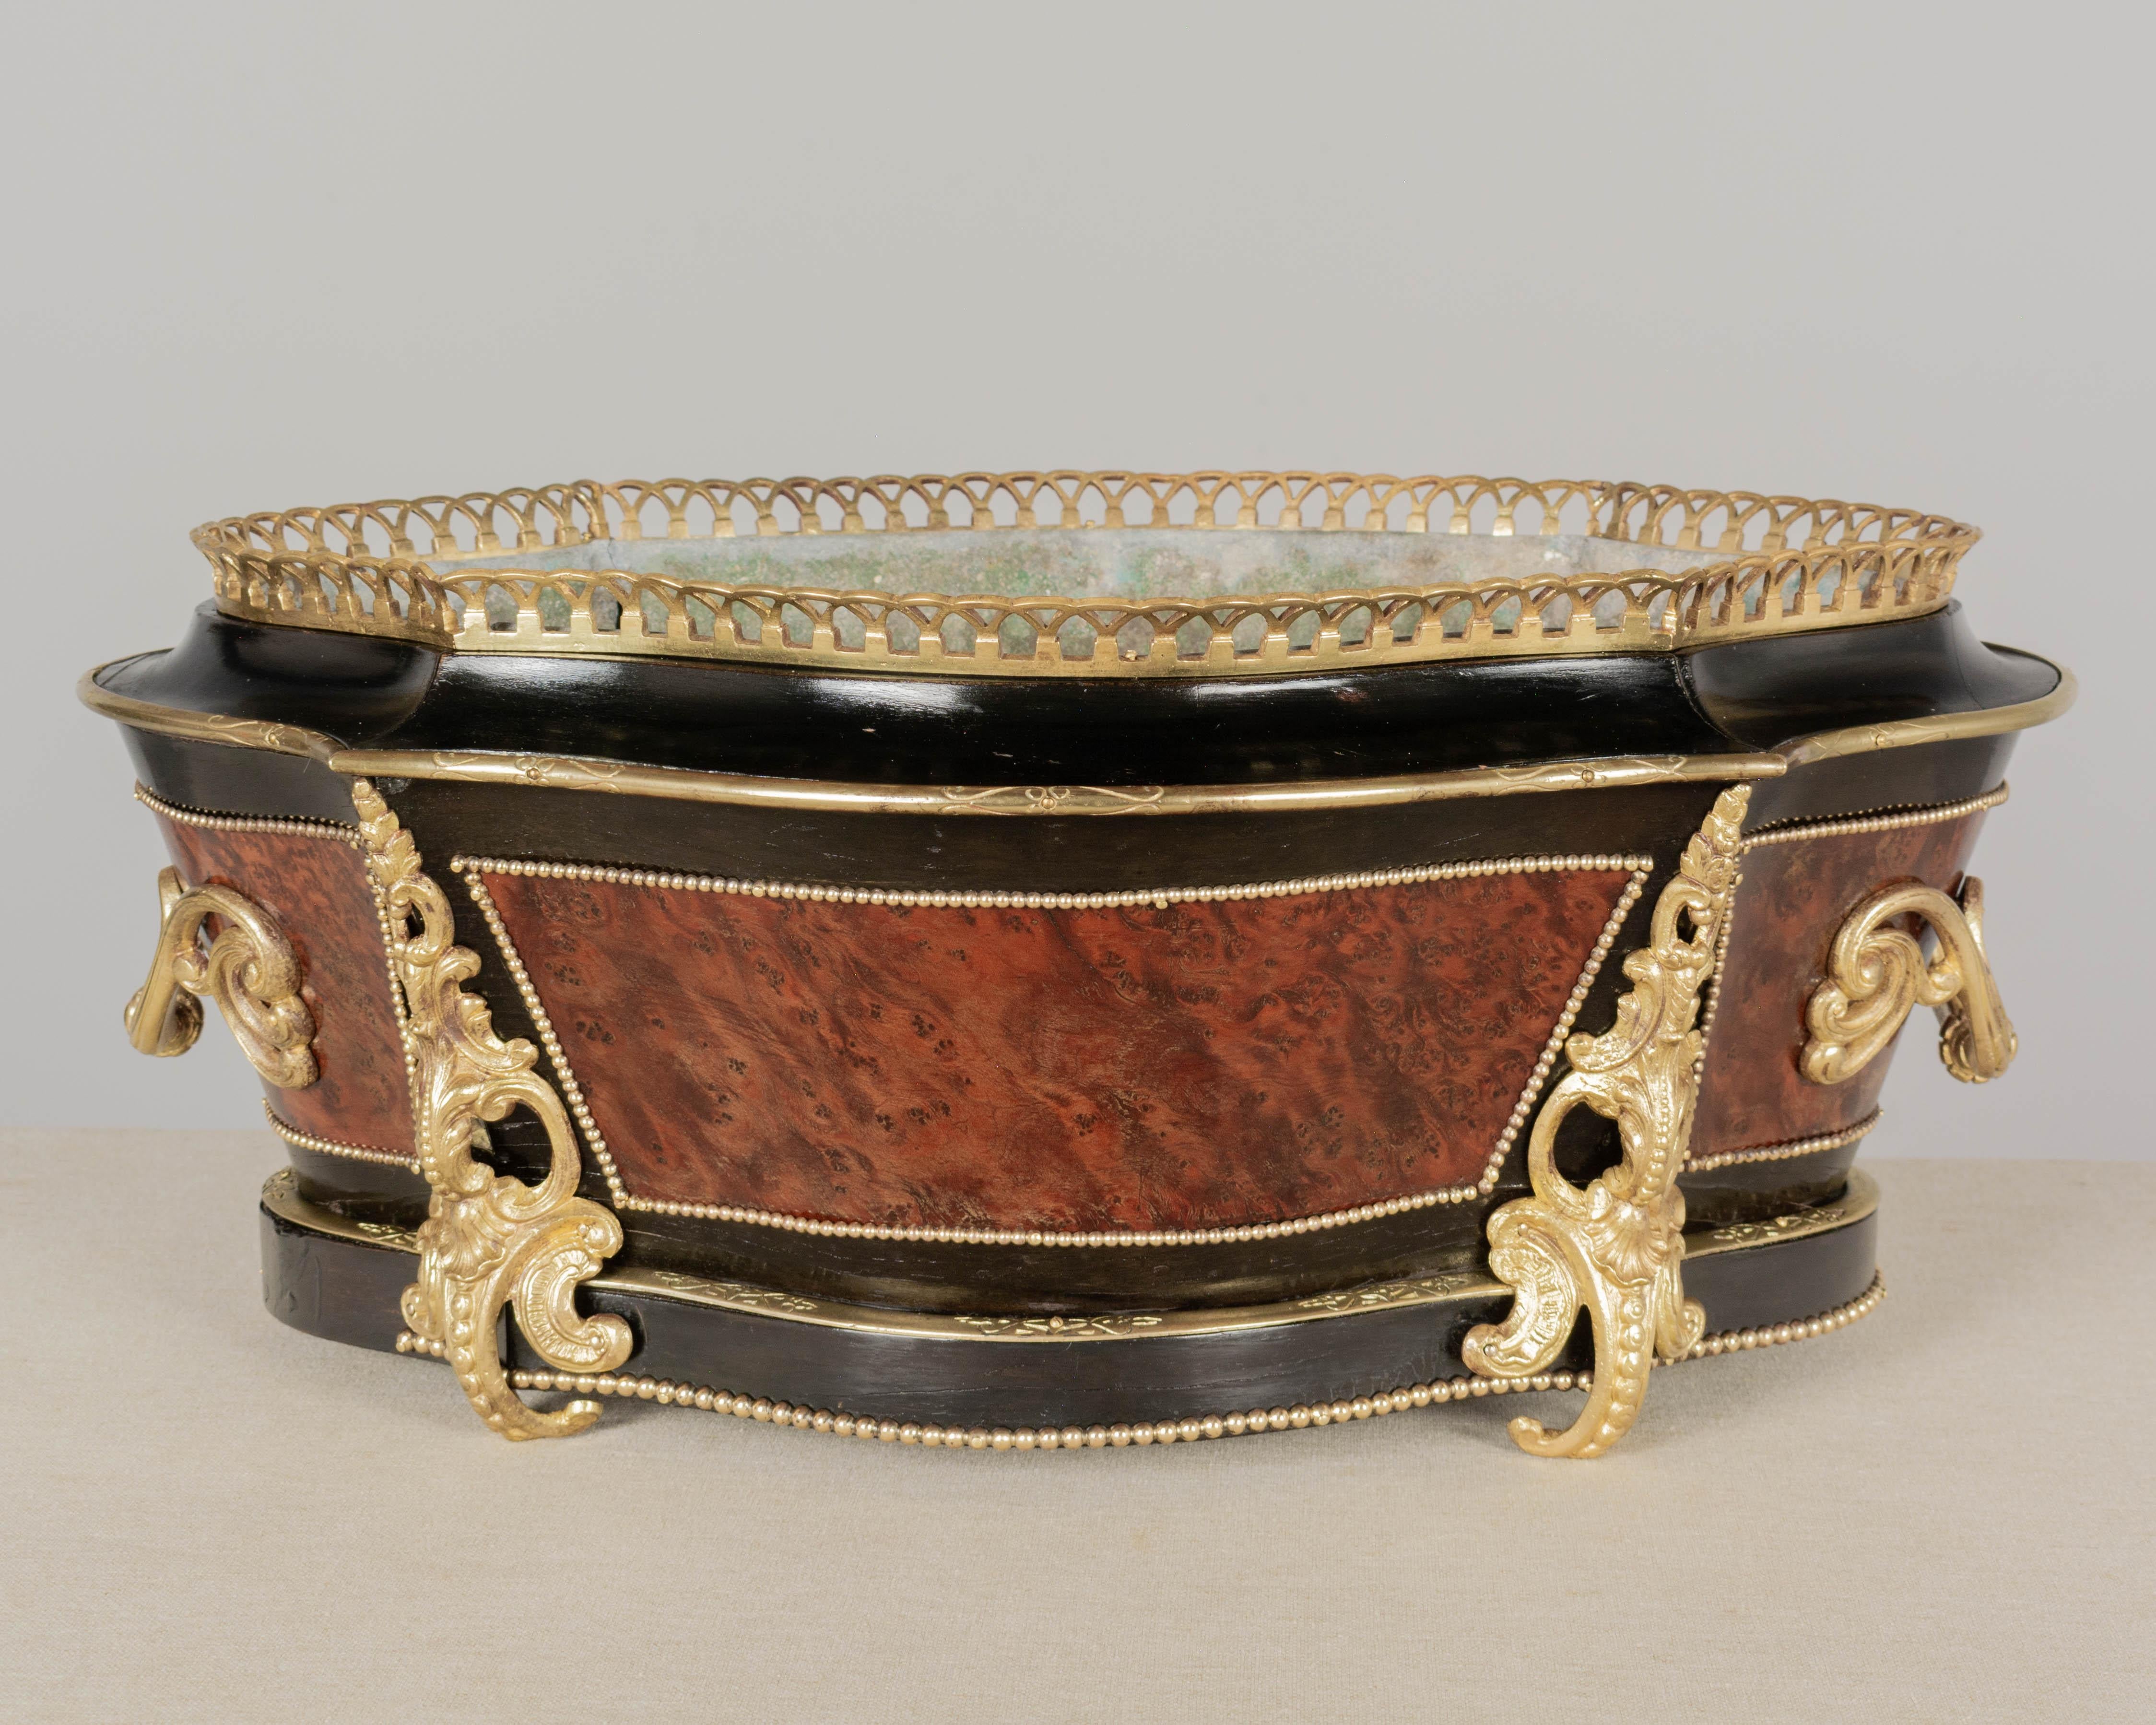 A 19th century French Napoleon III marquetry jardinière with unusual form, ebonized finish with burl of walnut veneer detailed with bead trim. Fine quality cast bronze handles, gallery and large corner ornaments (weighing a total of 6 lbs). French